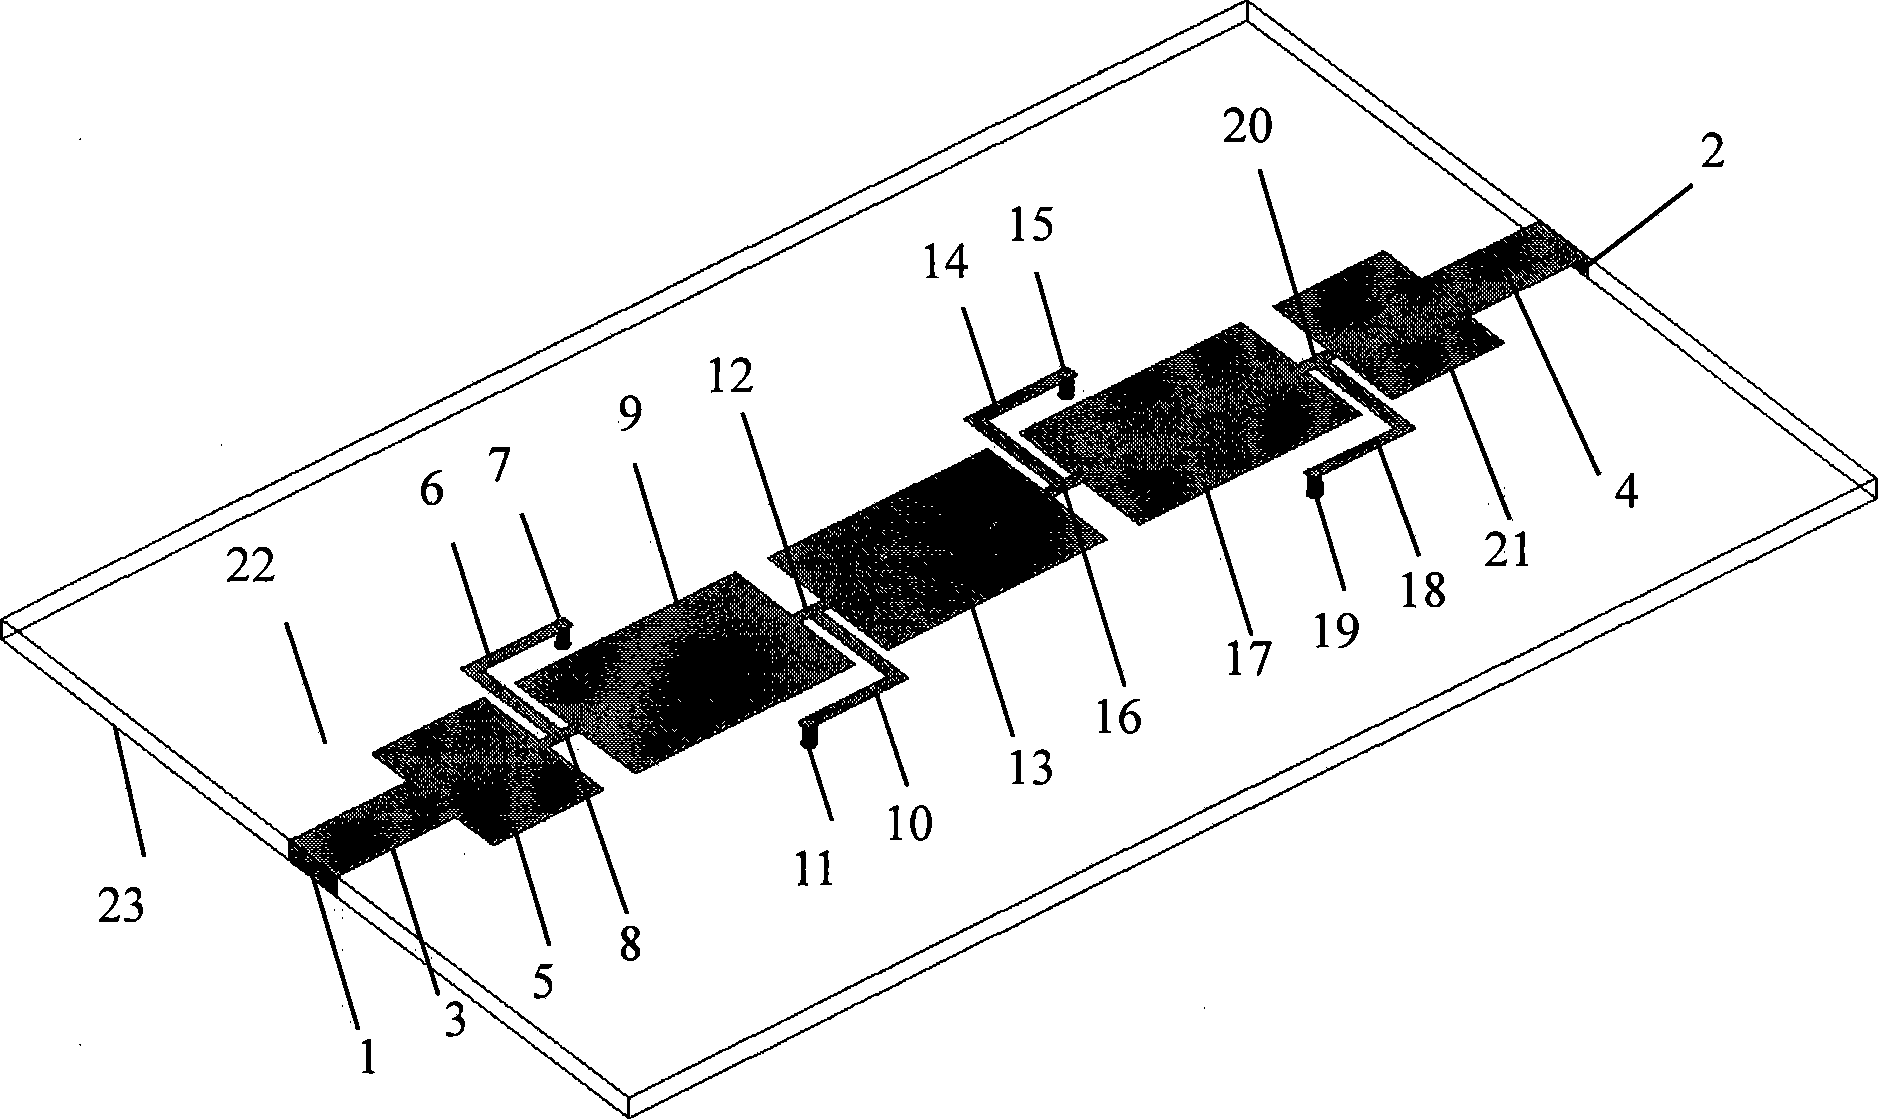 Ultra-wideband filter based on simplified left hand transmission line structure